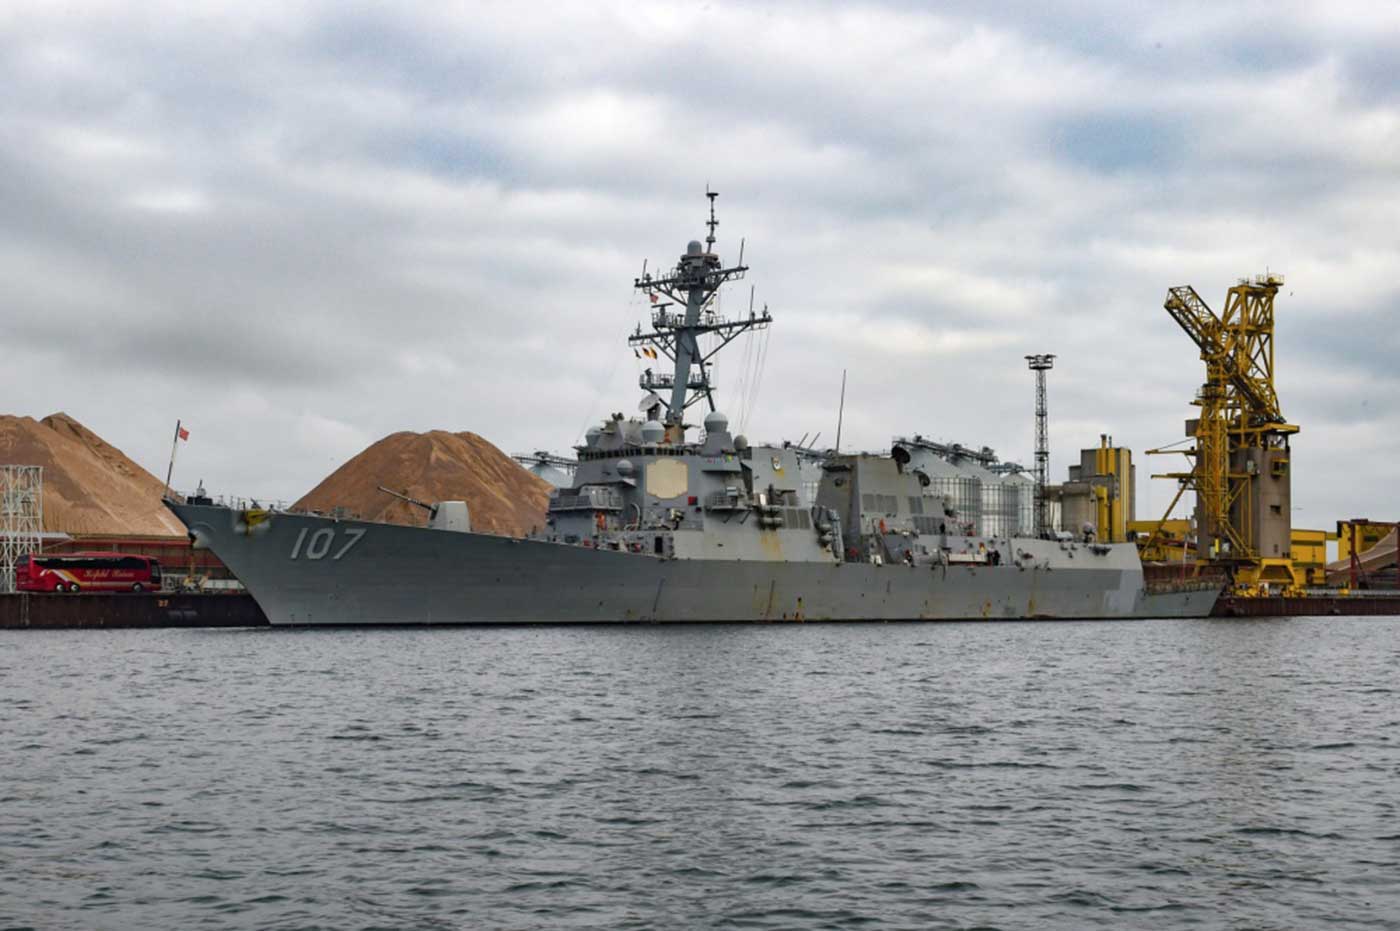 Rostock, Germany (Mar. 1, 2019) The guided-missile destroyer USS Gravely (DDG 107) moored in Rostock, Germany. Gravely is underway on a regularly-scheduled deployment as the flagship of Standing NATO Maritime Group 1 to conduct maritime operations and provide a continuous maritime capability for NATO in the northern Atlantic -- U.S. Navy photo by MCS 2nd Class Mark Andrew Hays. -